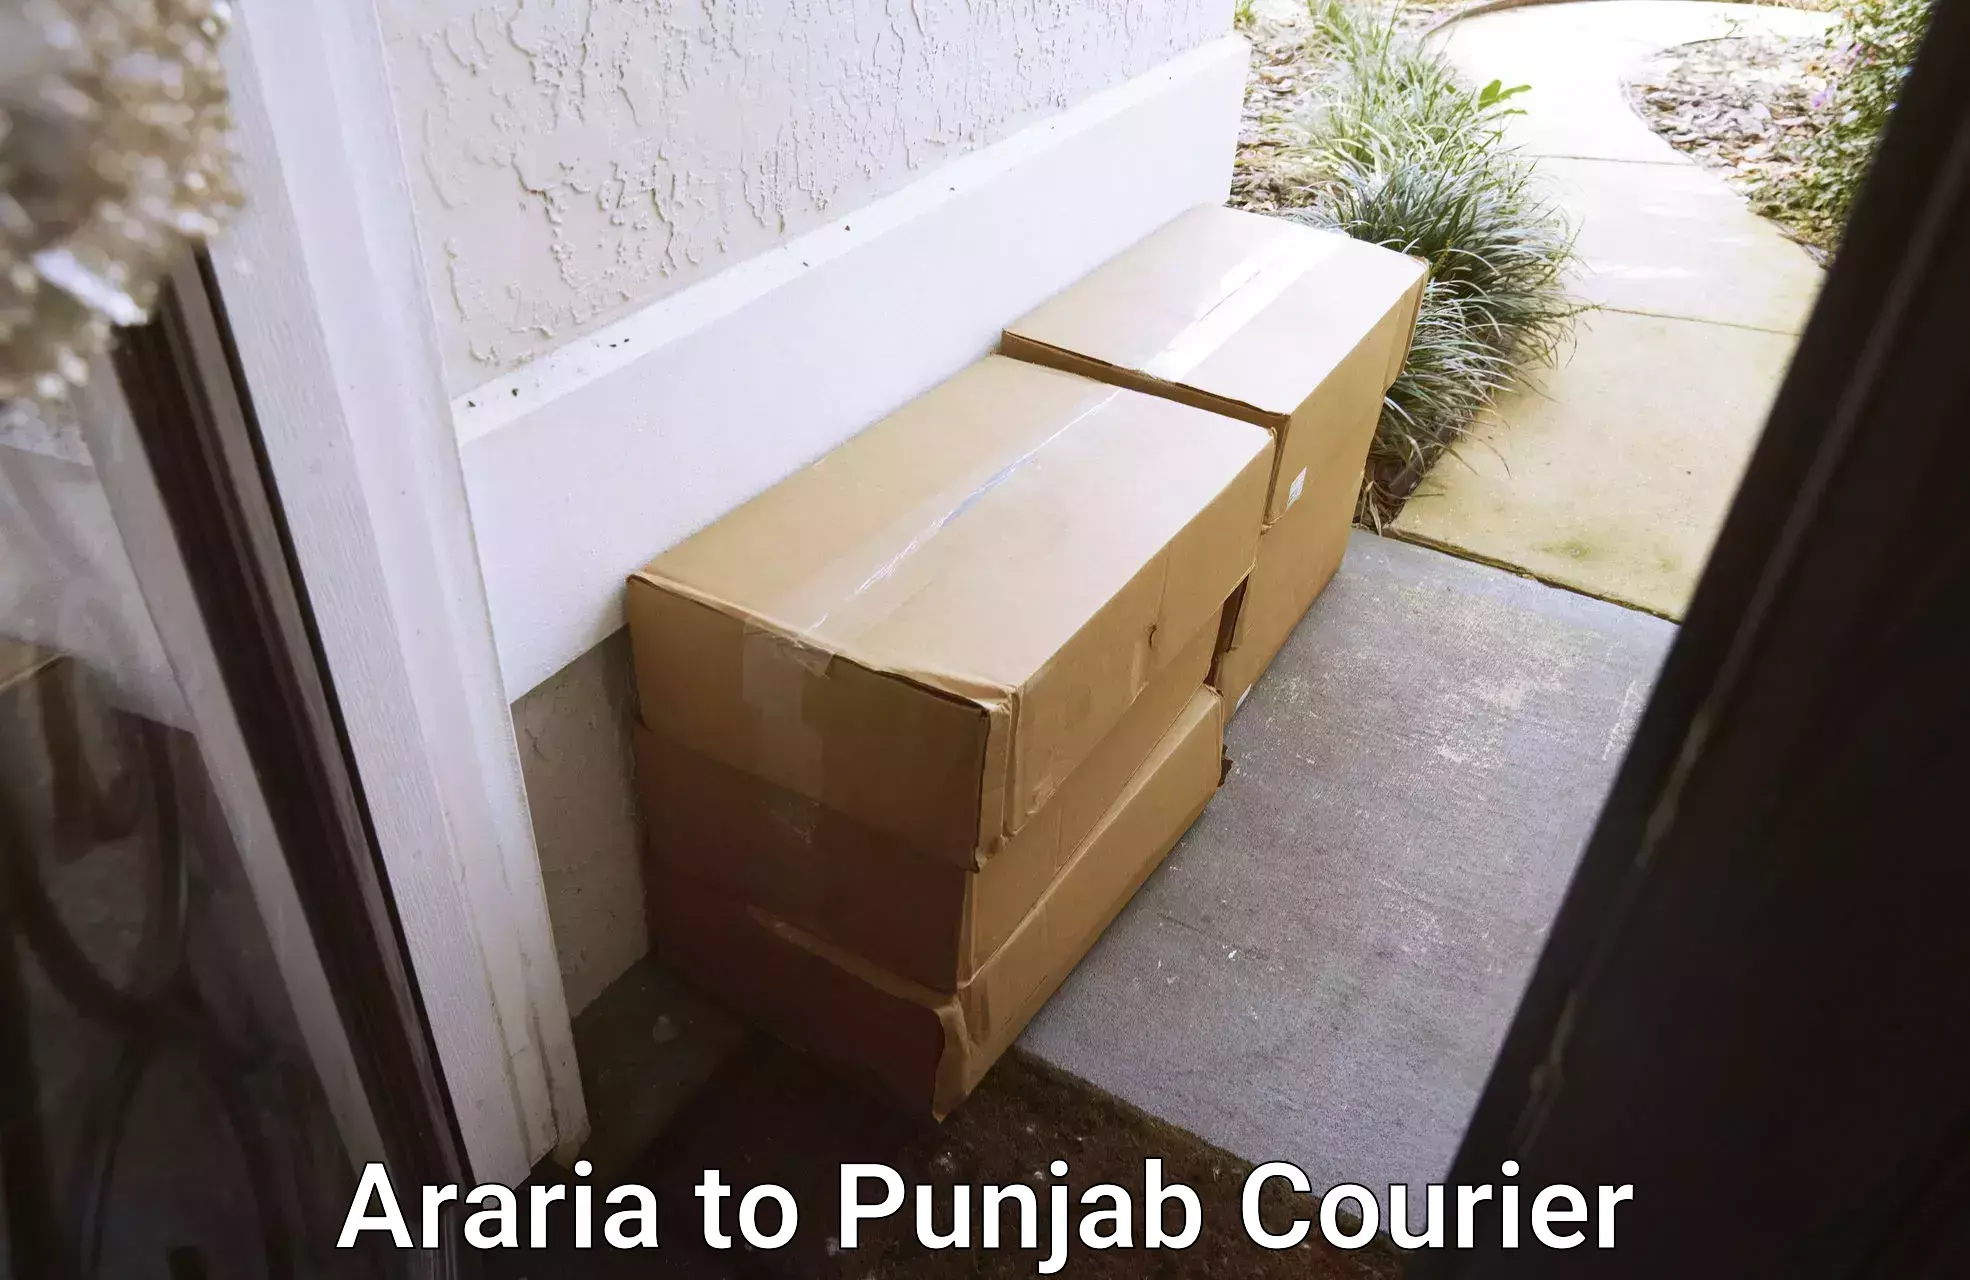 Household moving experts Araria to Punjab